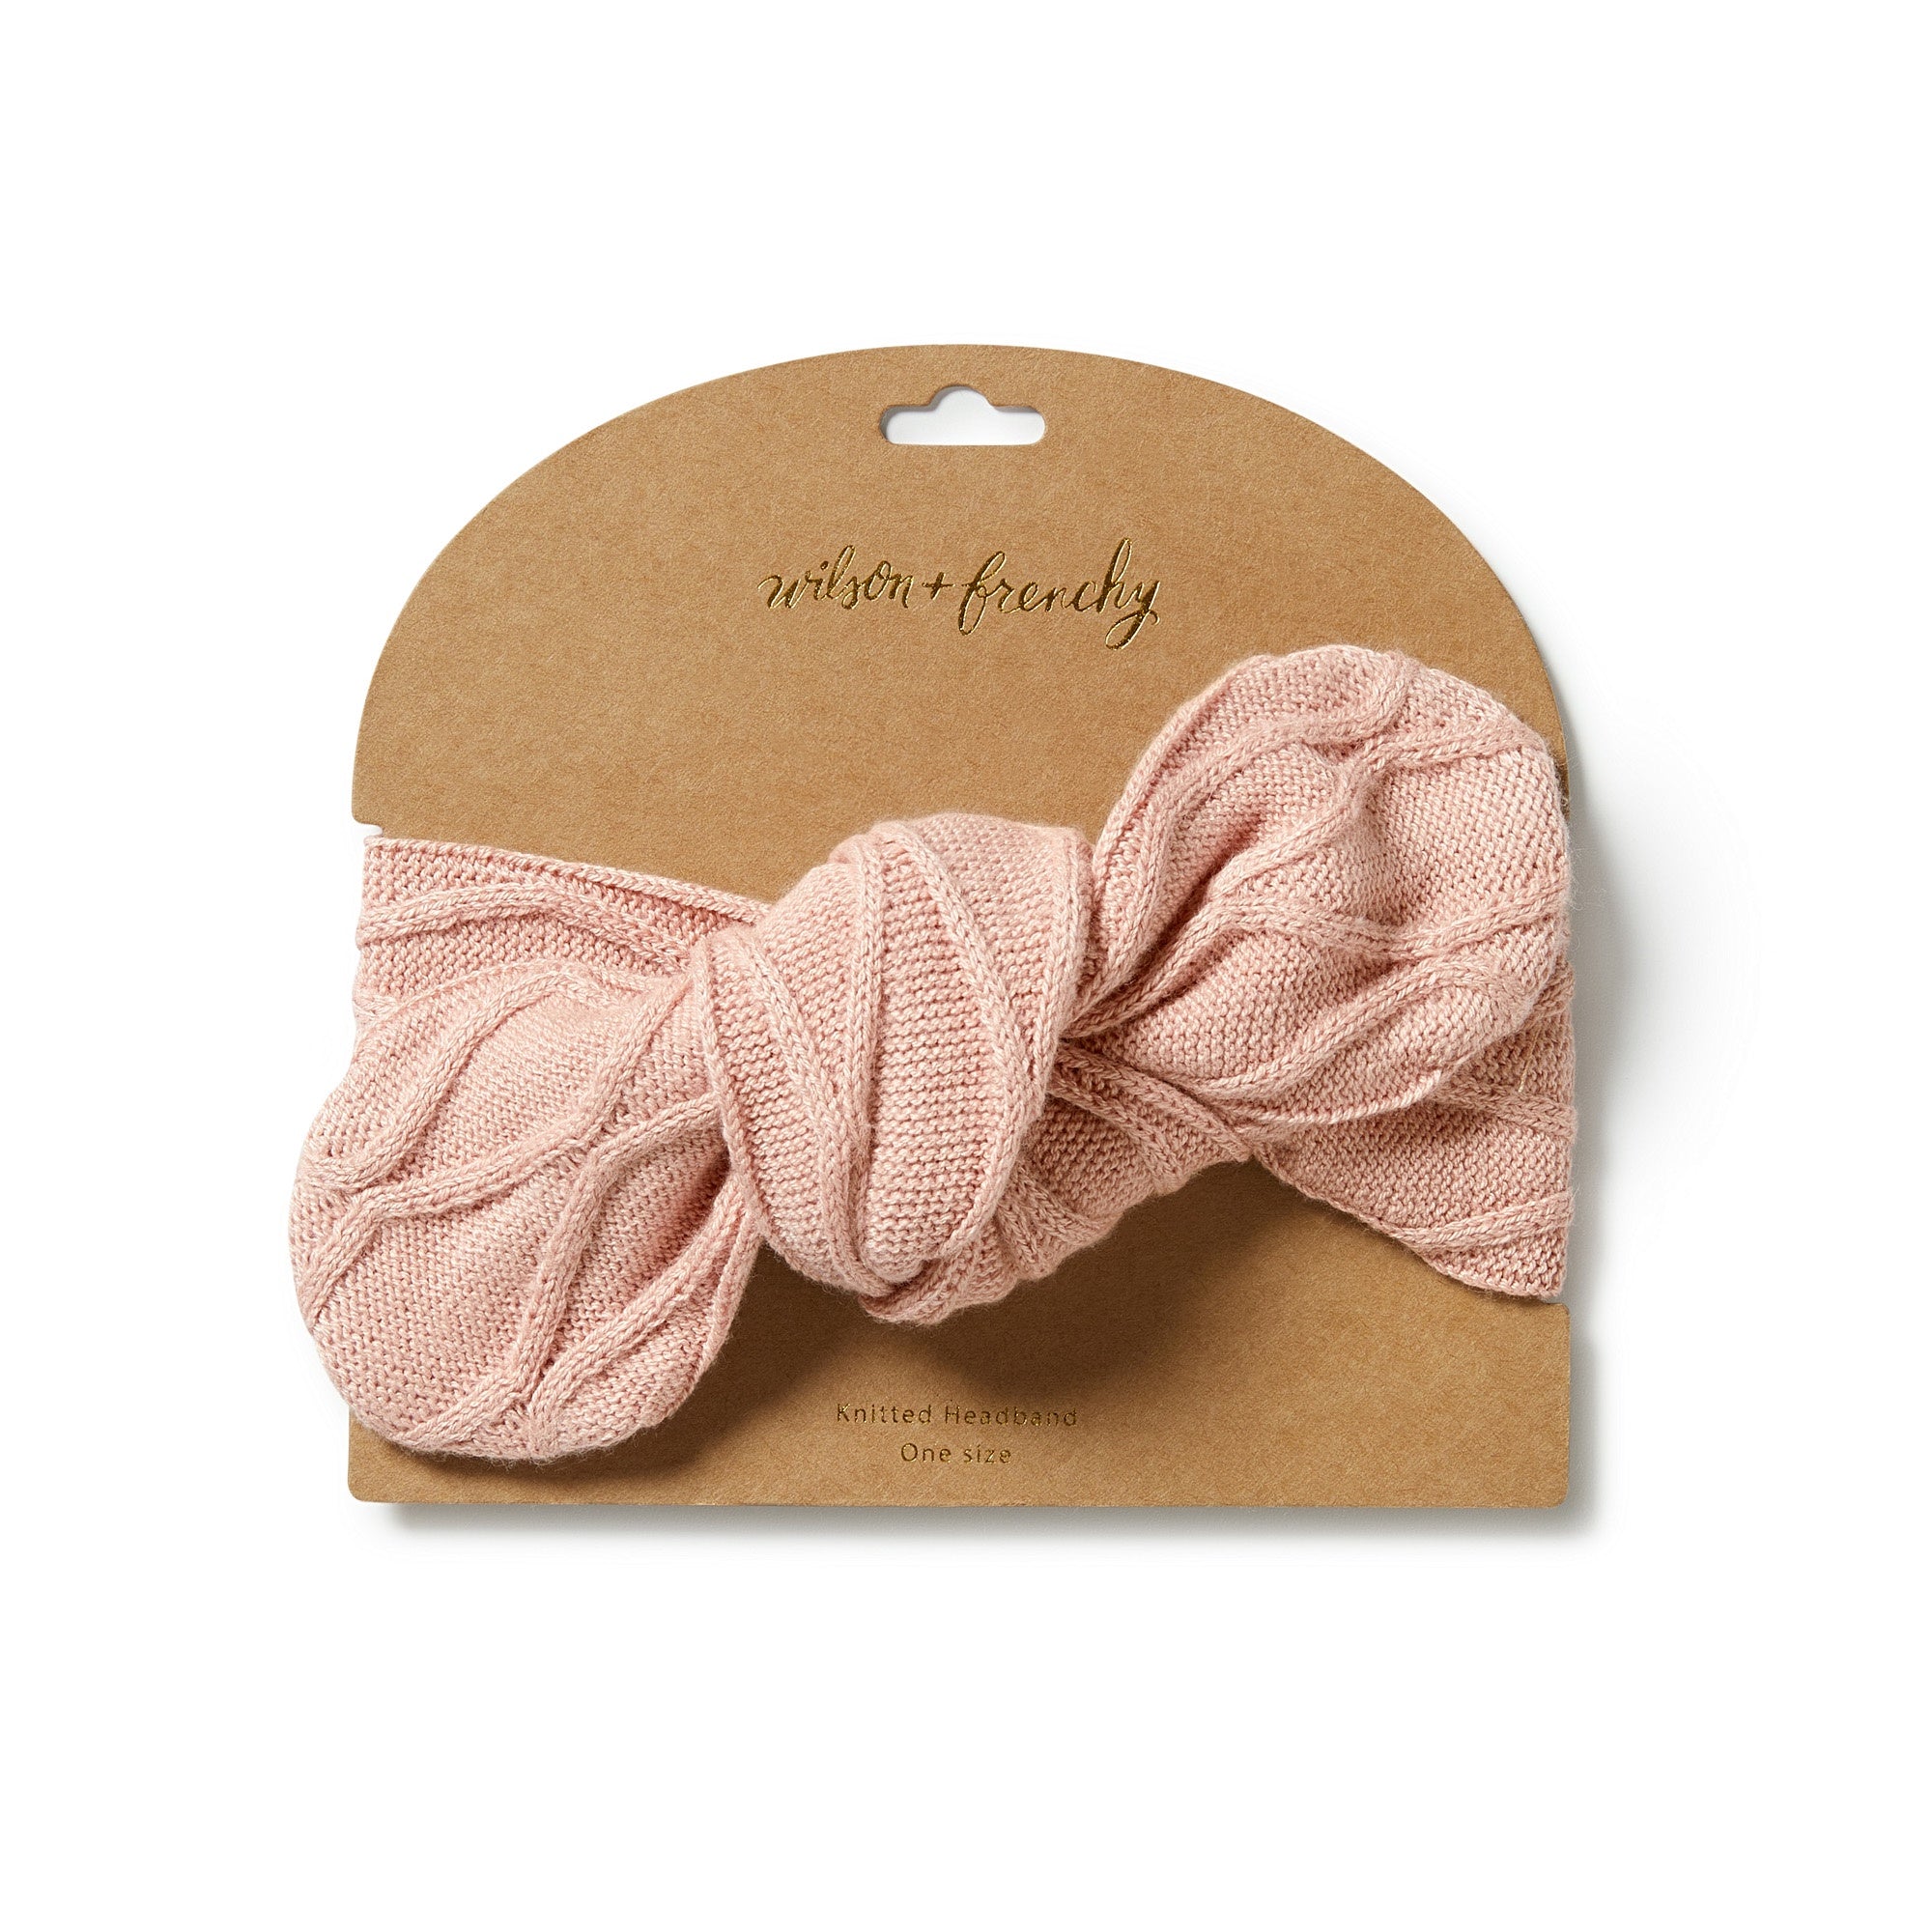 Wilson & Frenchy - Knitted Cable Headband -  Rose